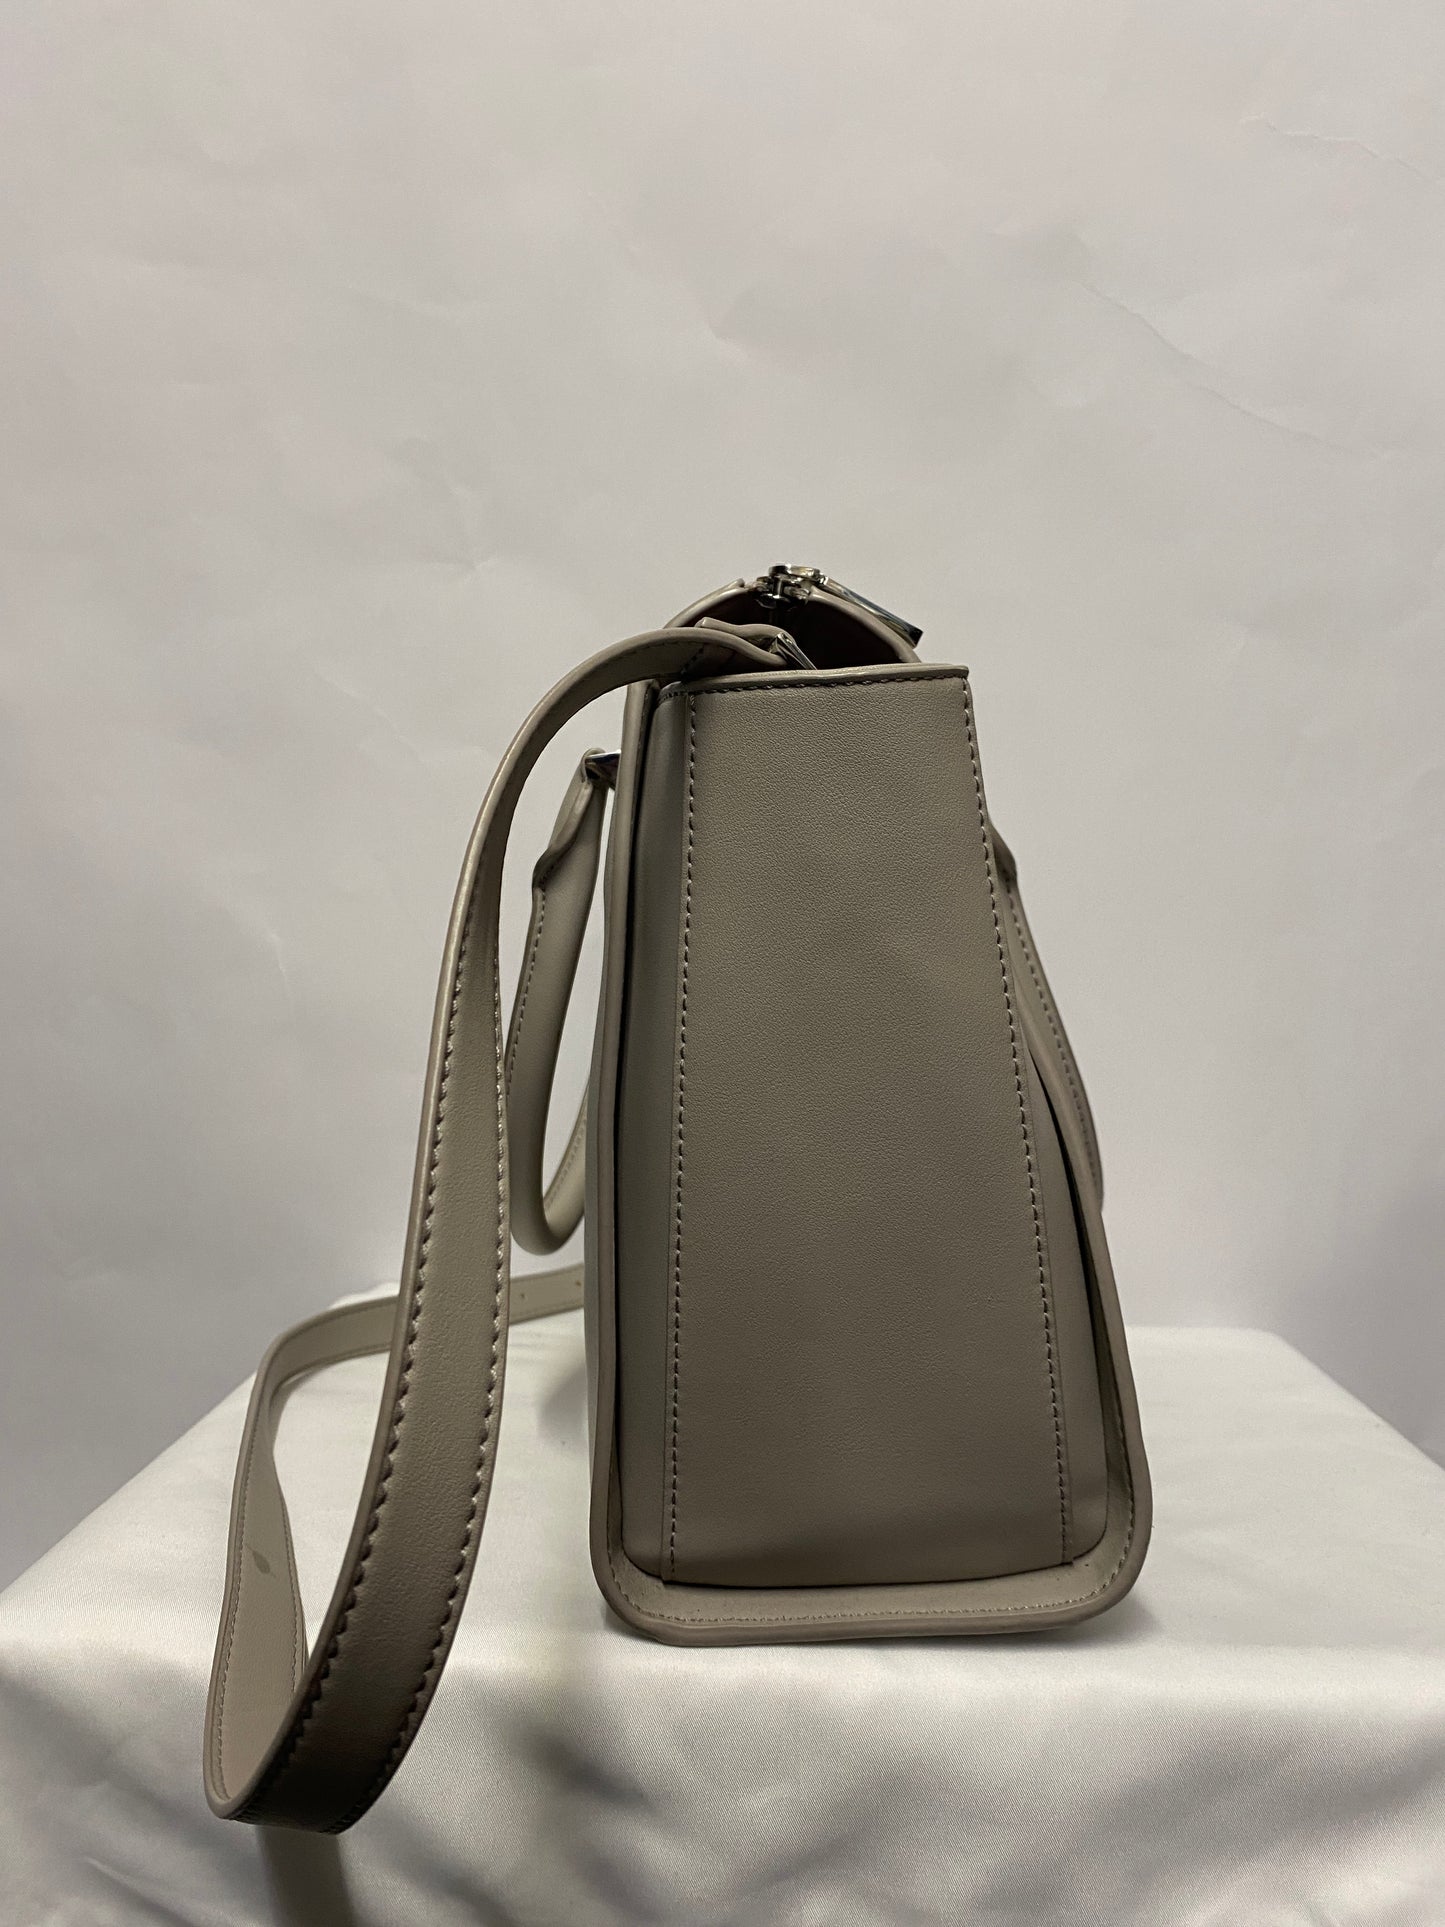 Charles and keith Grey Harper Structured Hand Bag